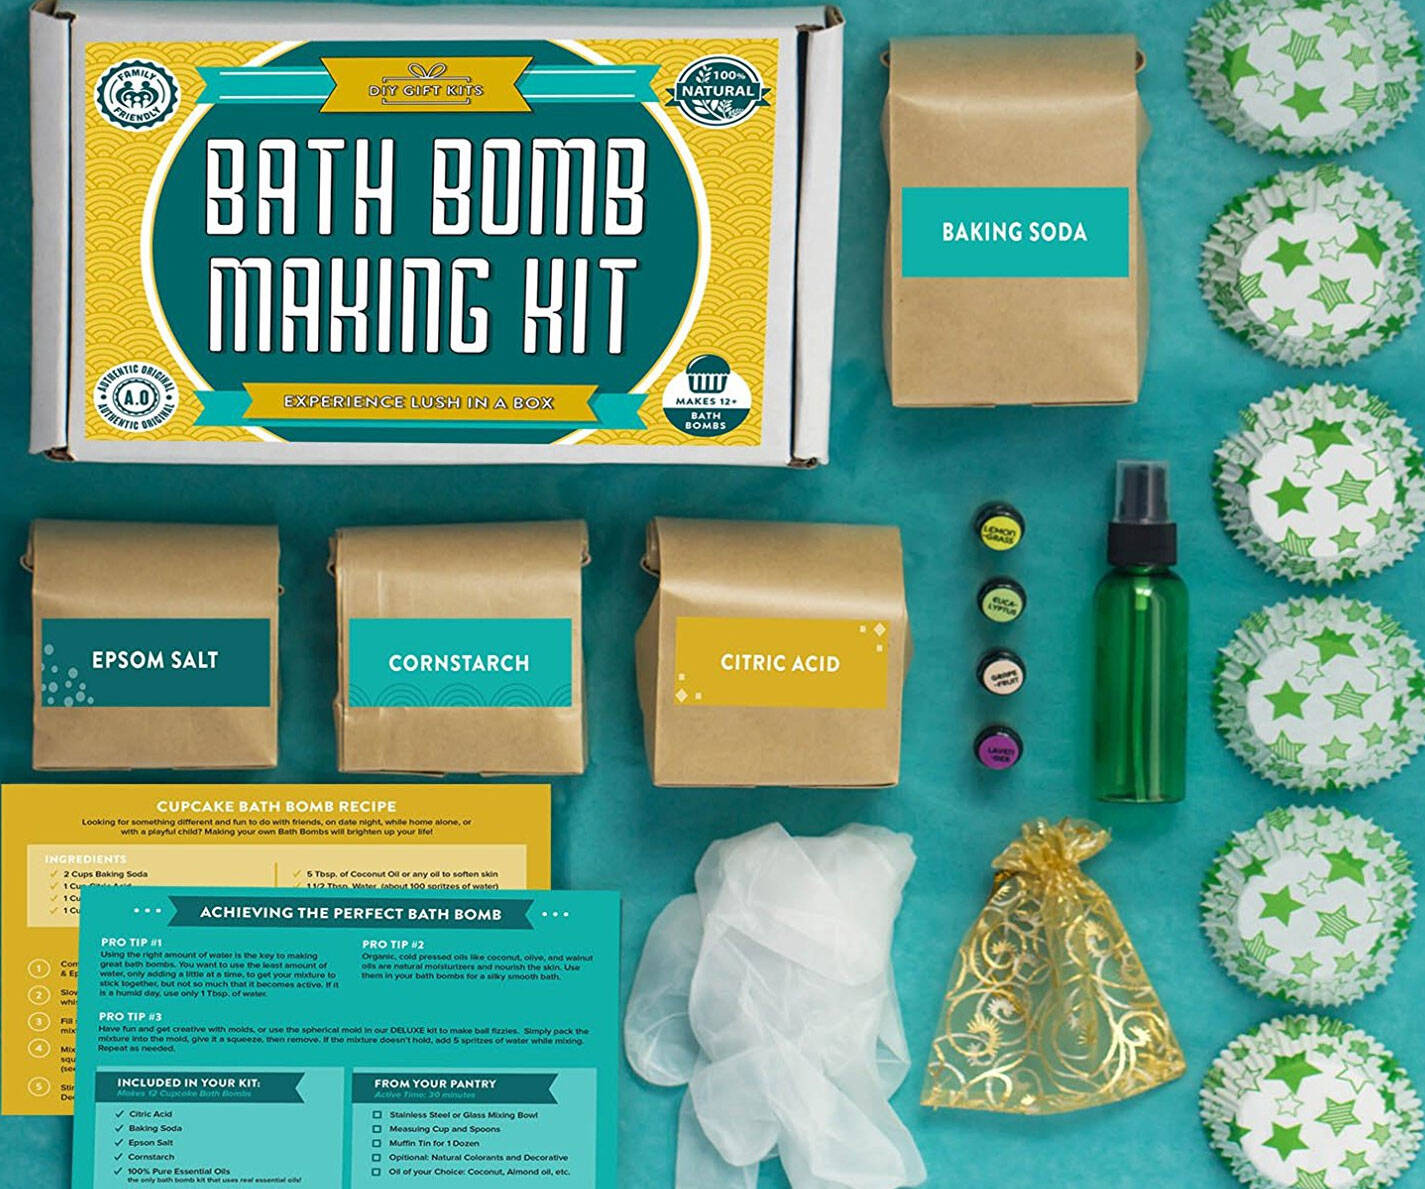 Bath Bomb Making Kit - coolthings.us